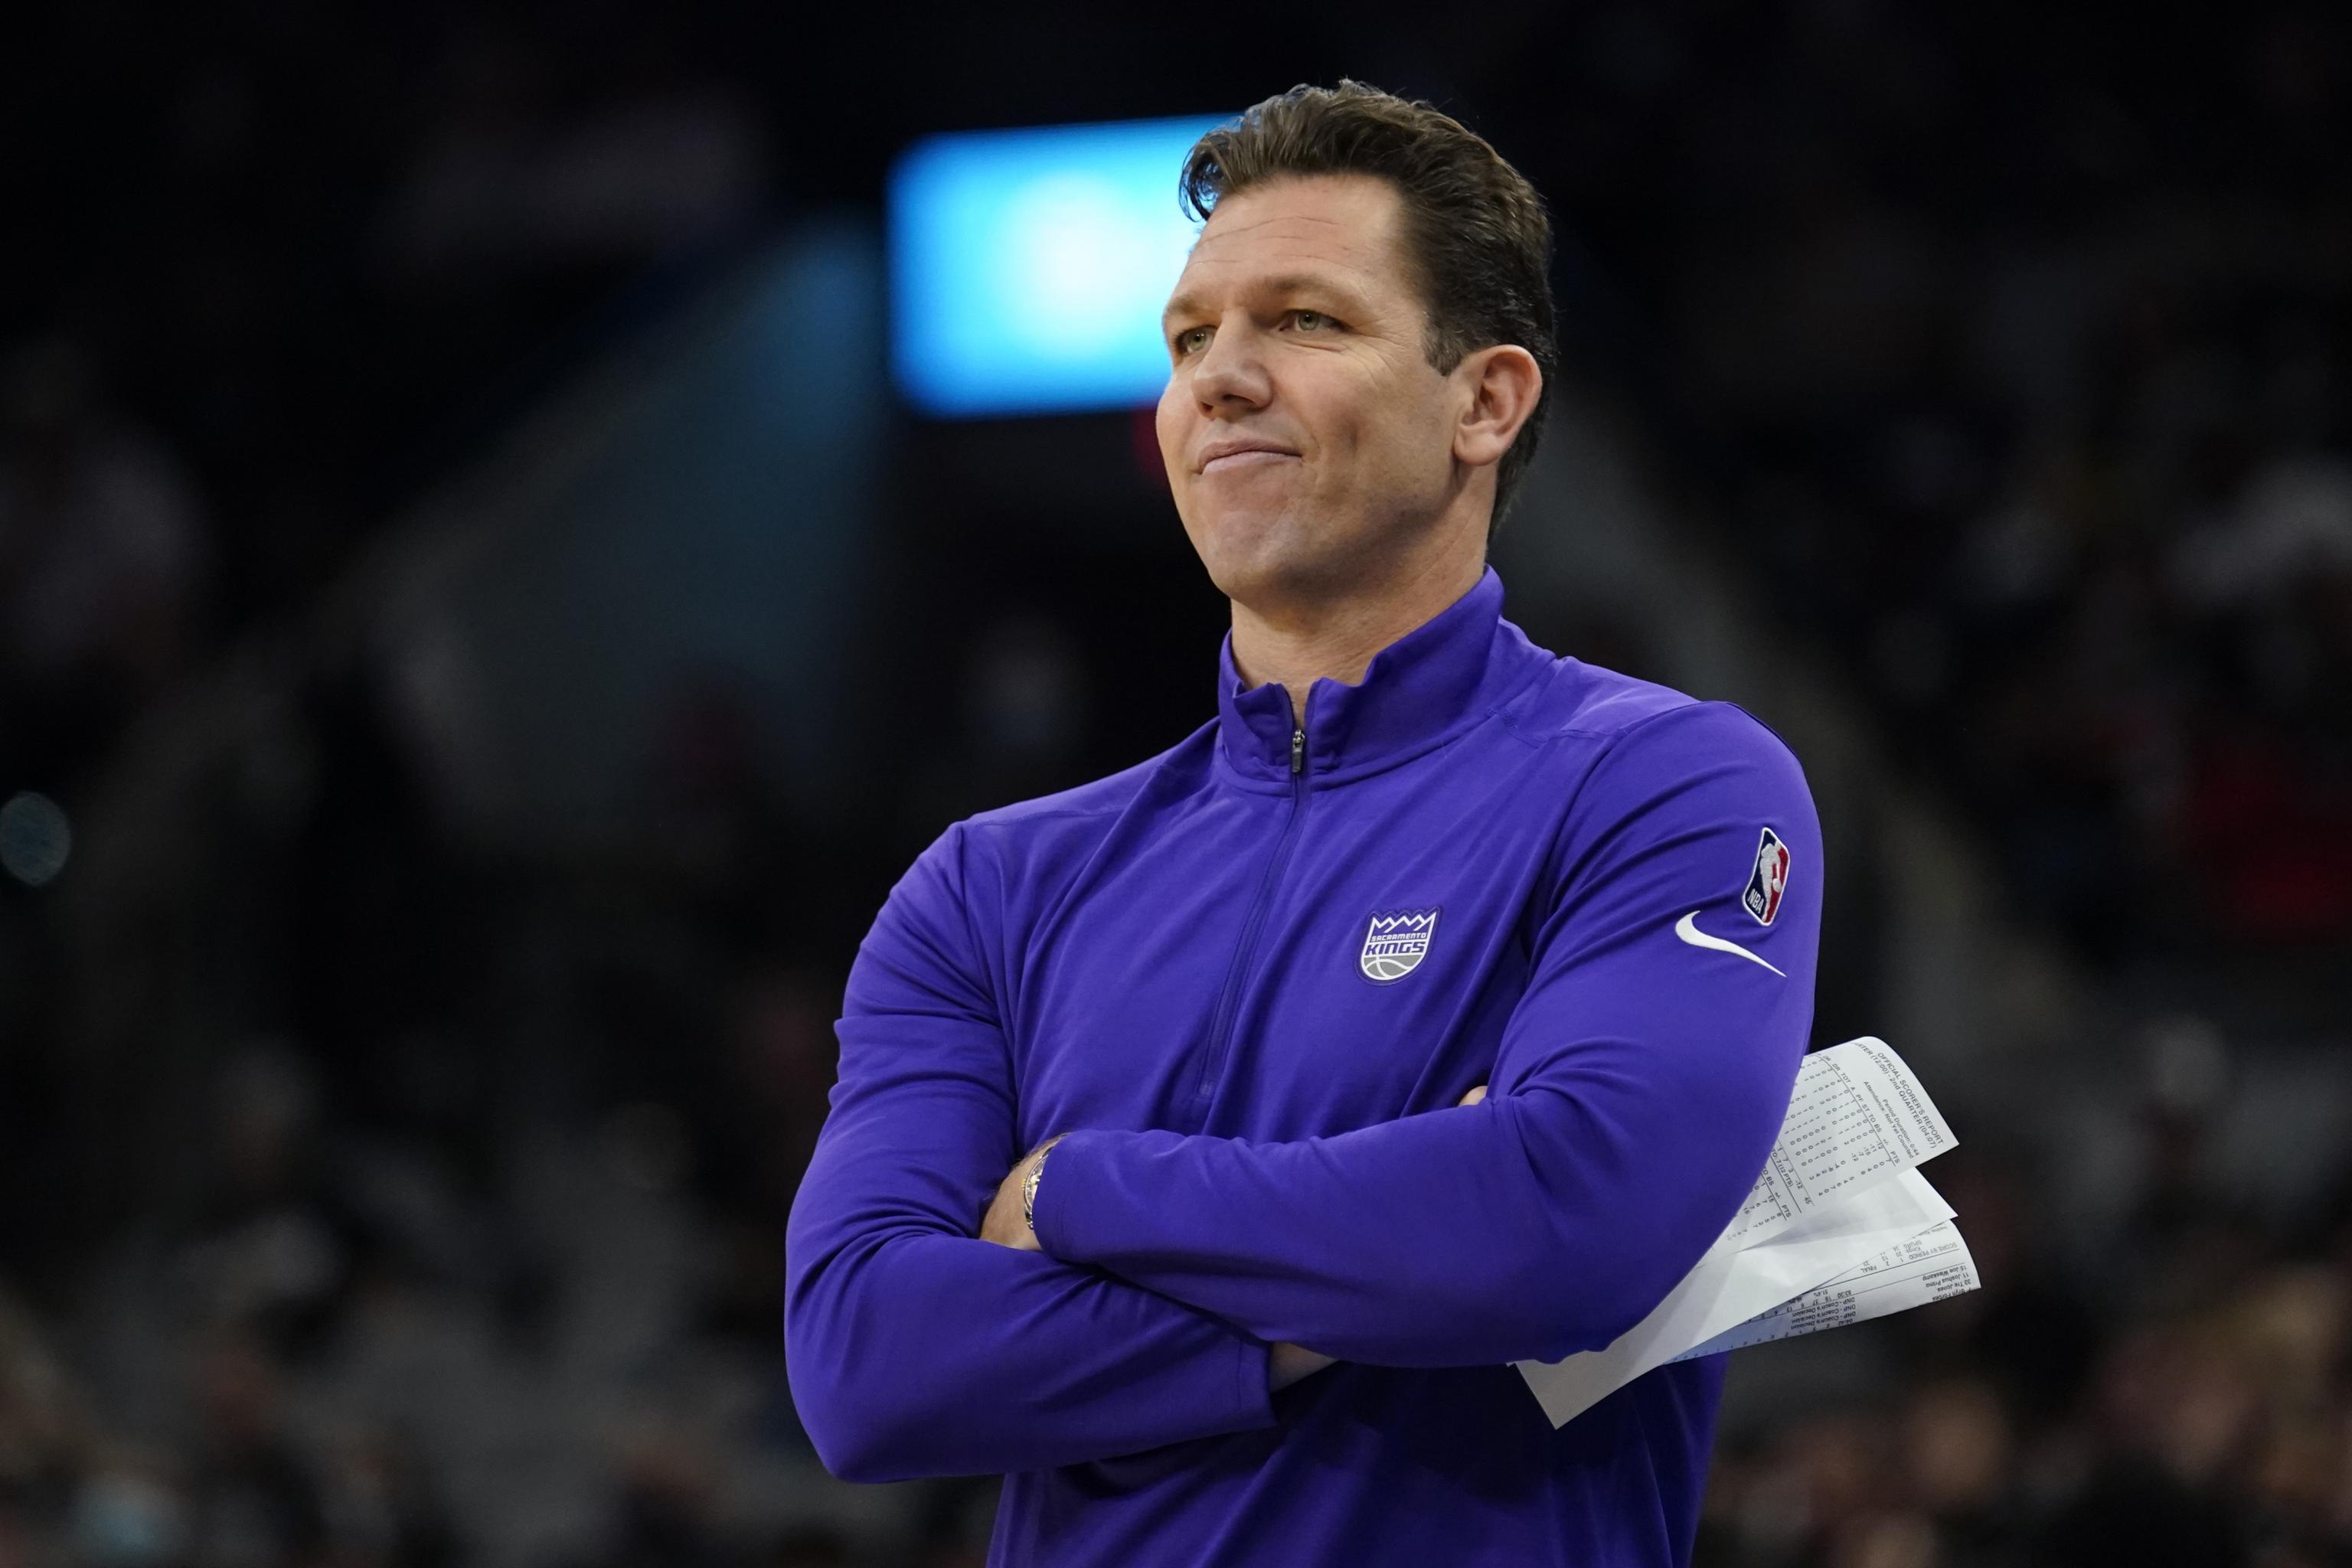 Kings' Luke Walton commends Davion Mitchell for offensive outburst